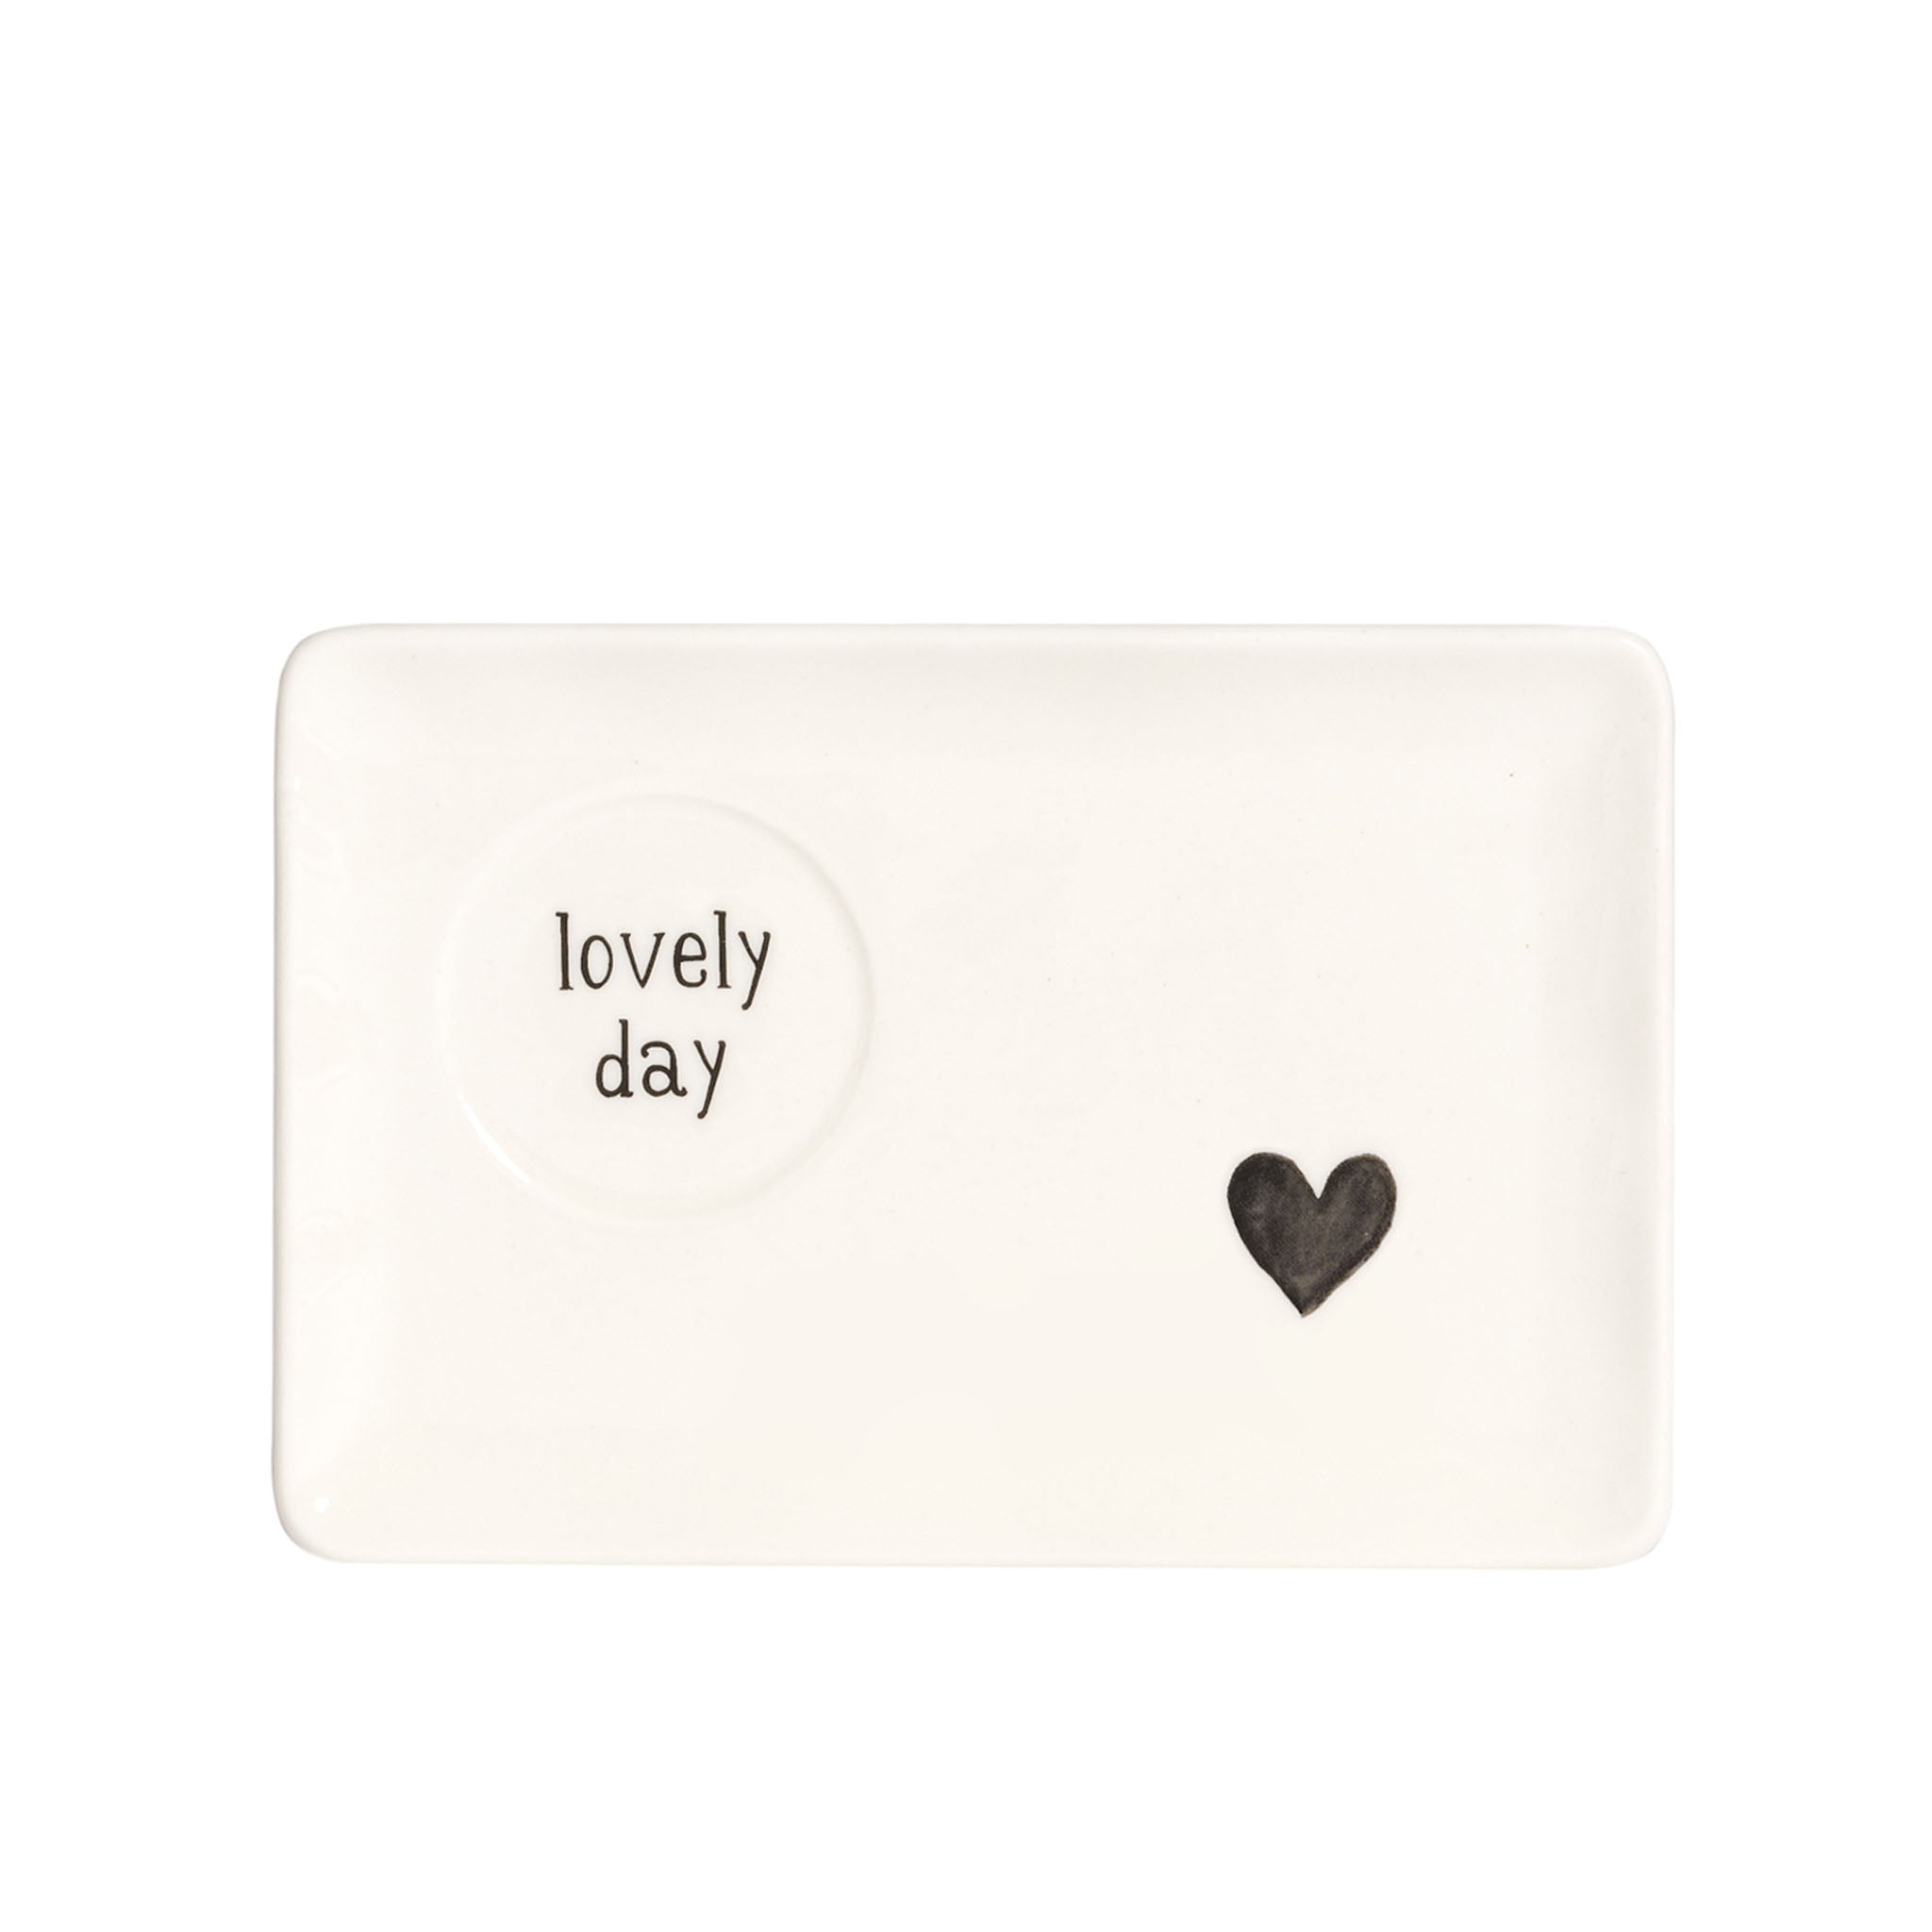 Lovely Day espresso cup plates - Set of 2